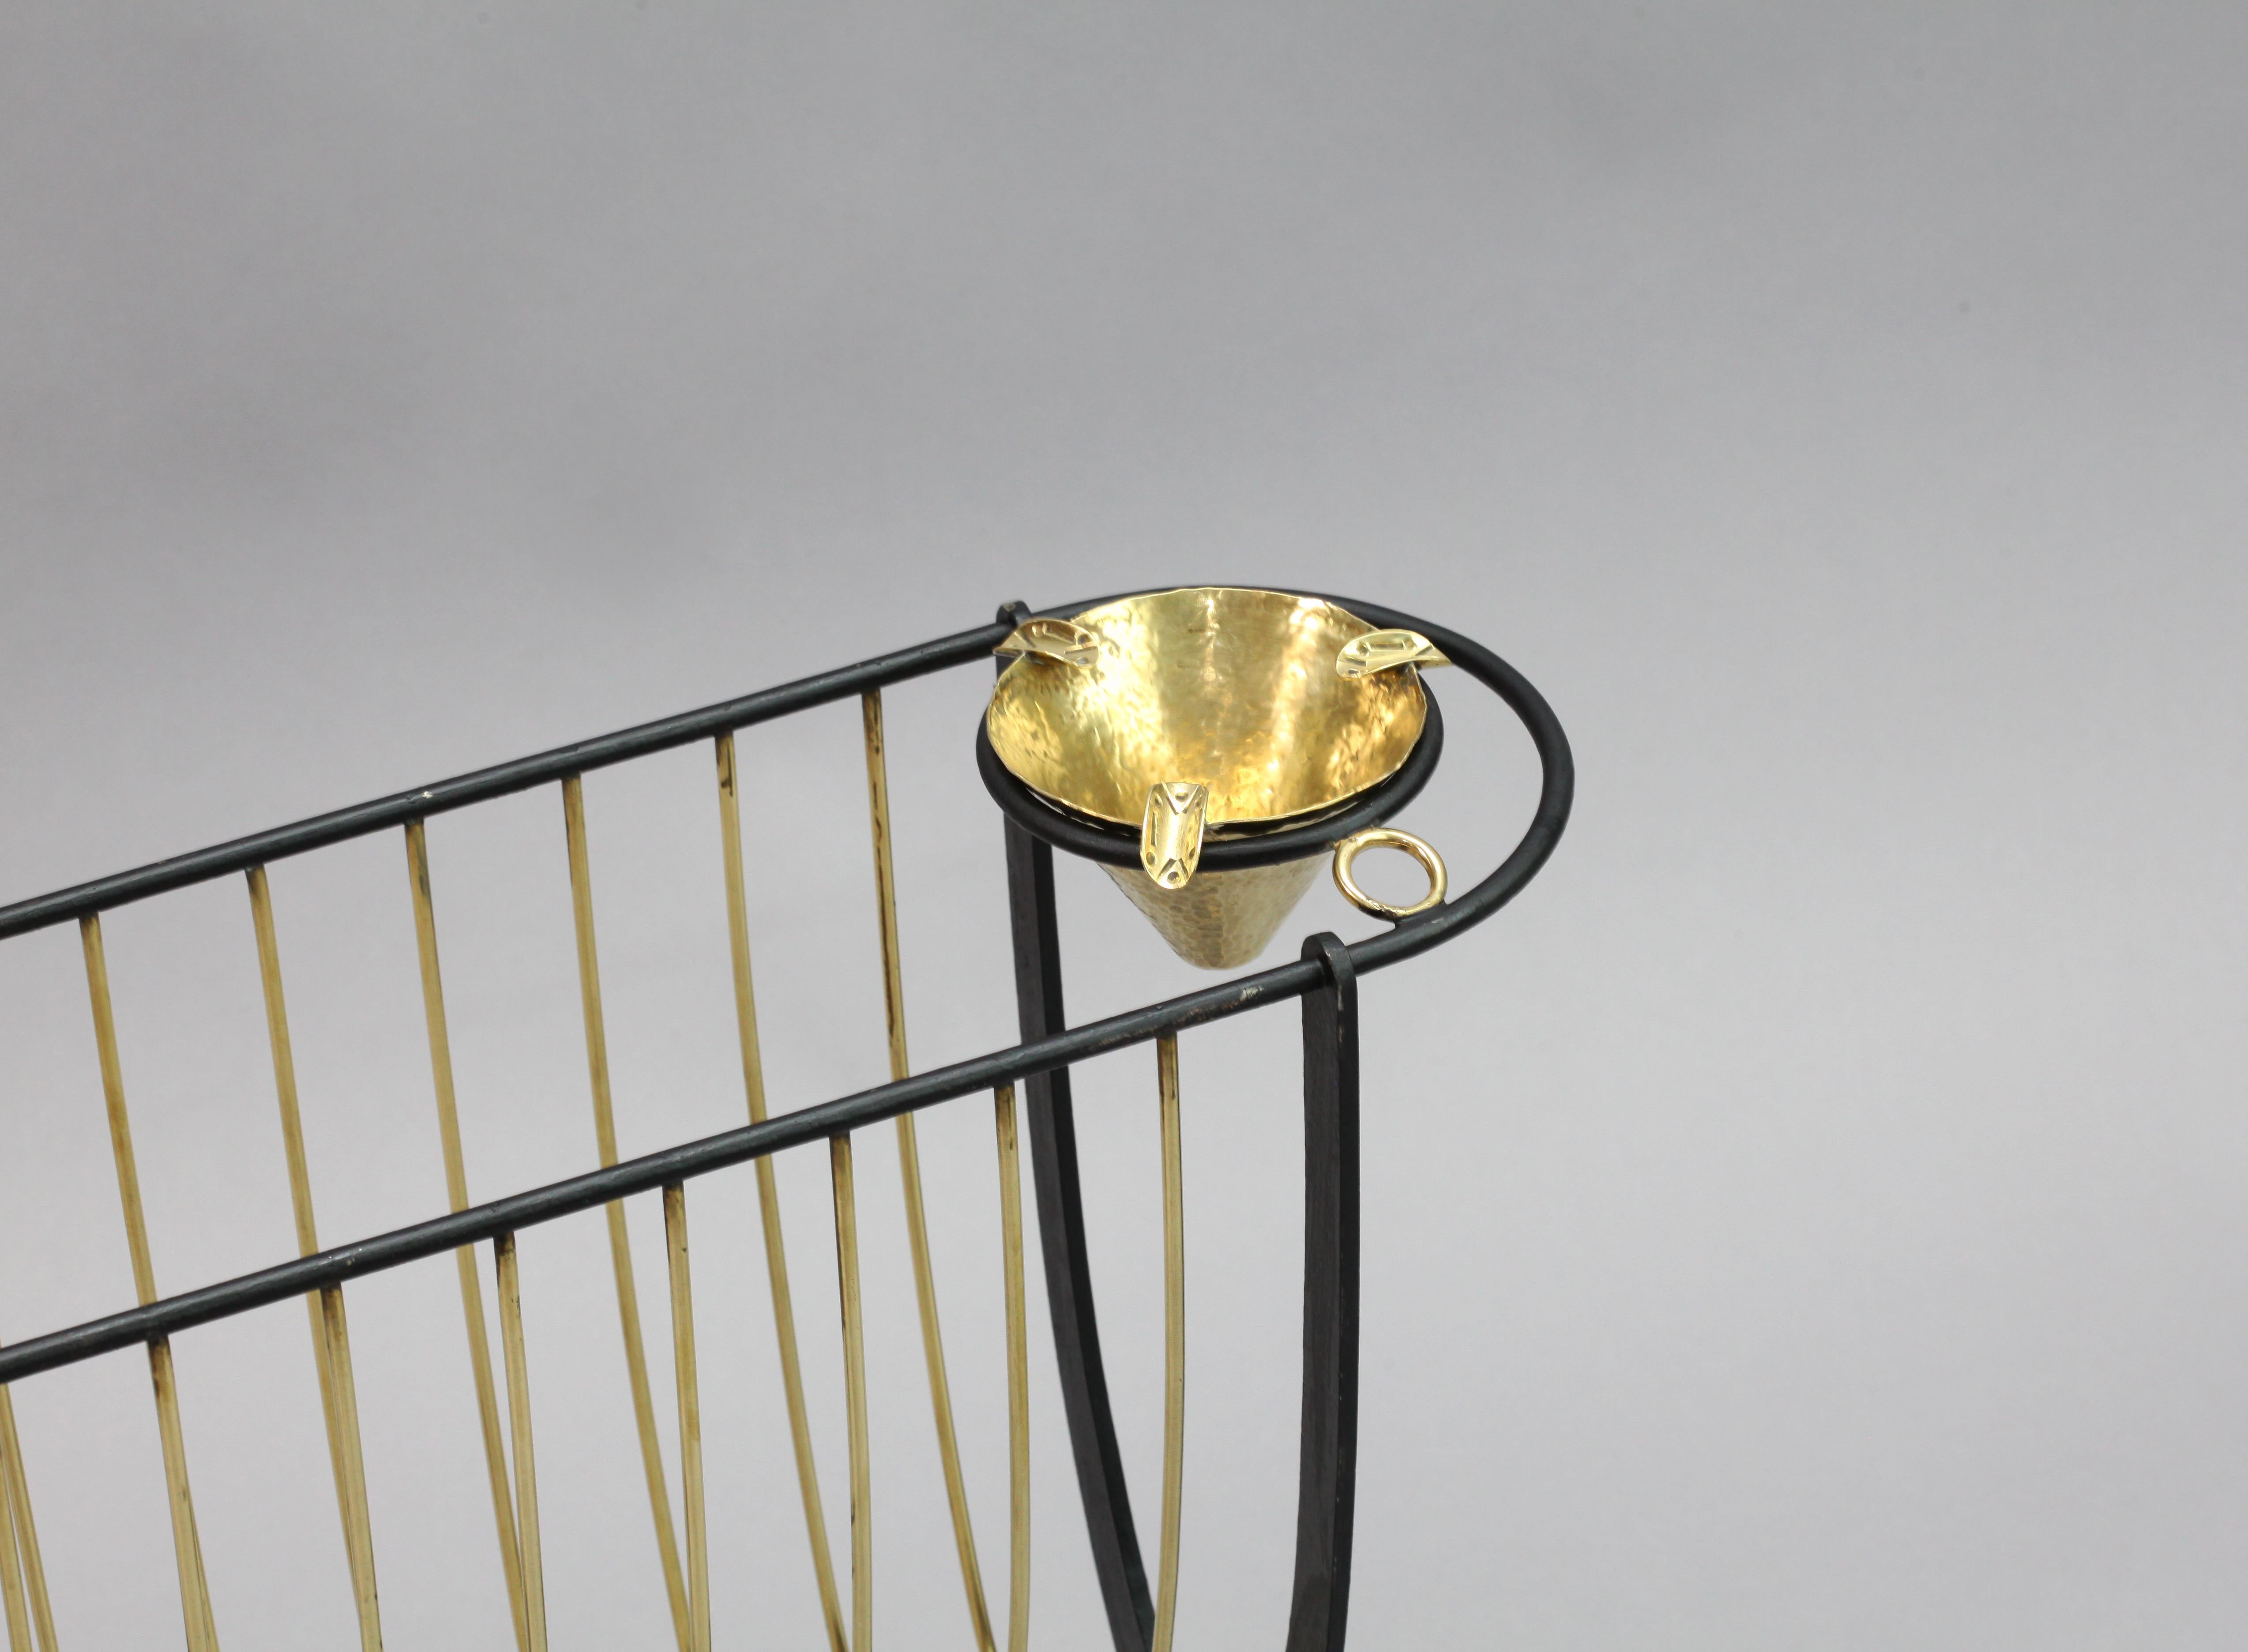 newspaper rack with ashtray,
Italy 1950.
black laquered metal, brass ashtray.